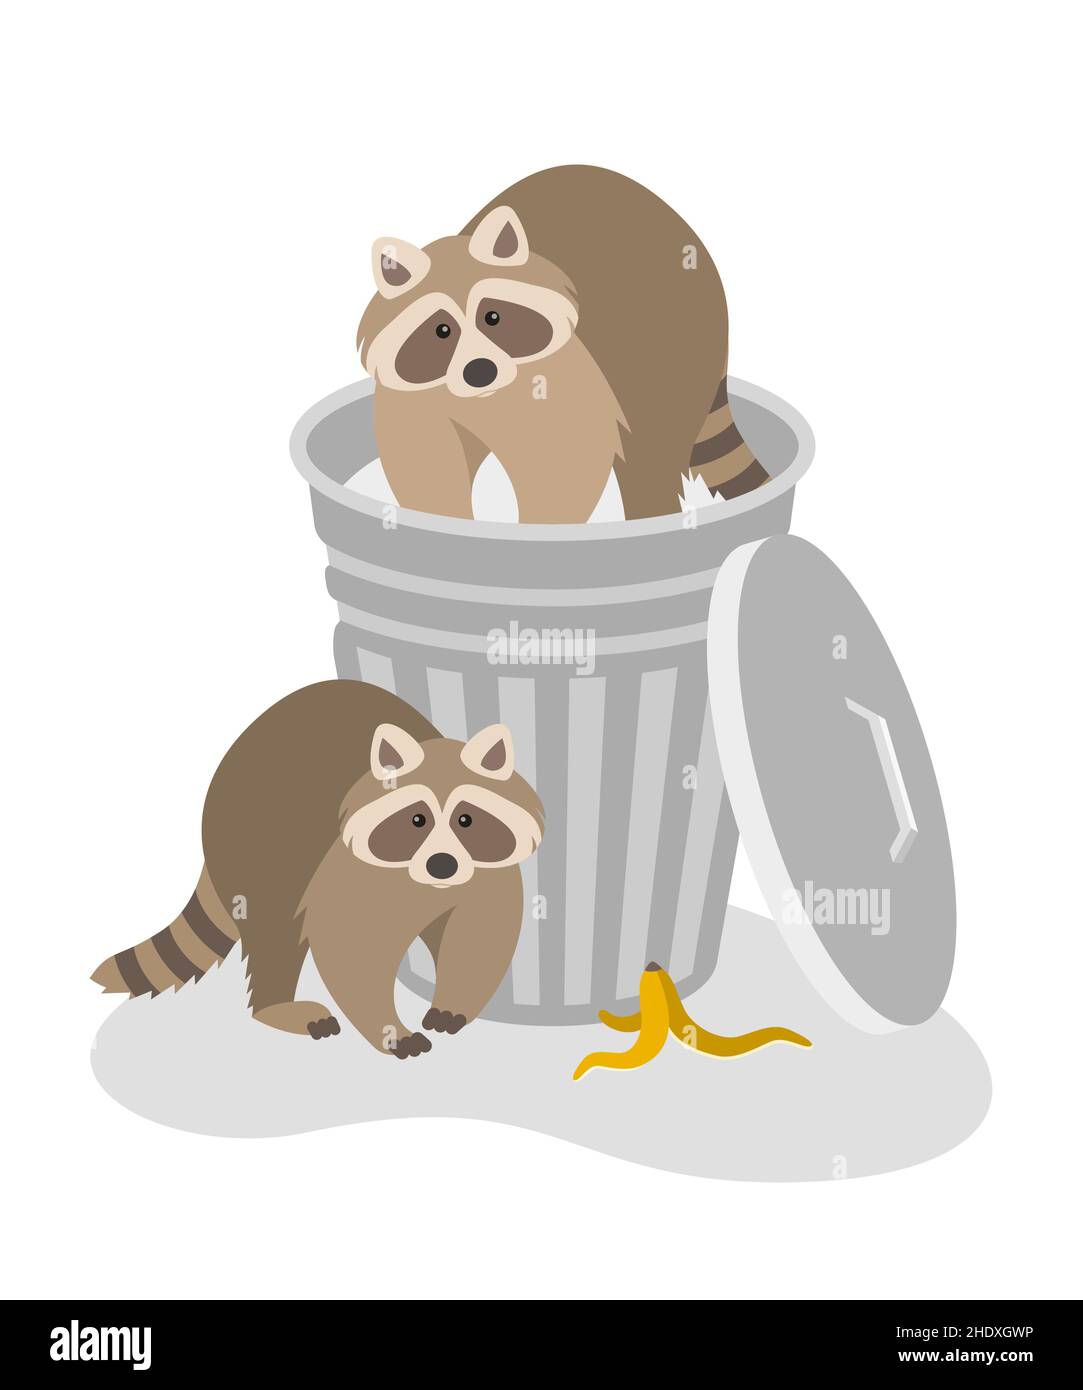 Raccoons steal household rubbish in a street trash can. Wildlife control and pest control services, raccoons removal. Flat cartoon illustration isolat Stock Vector